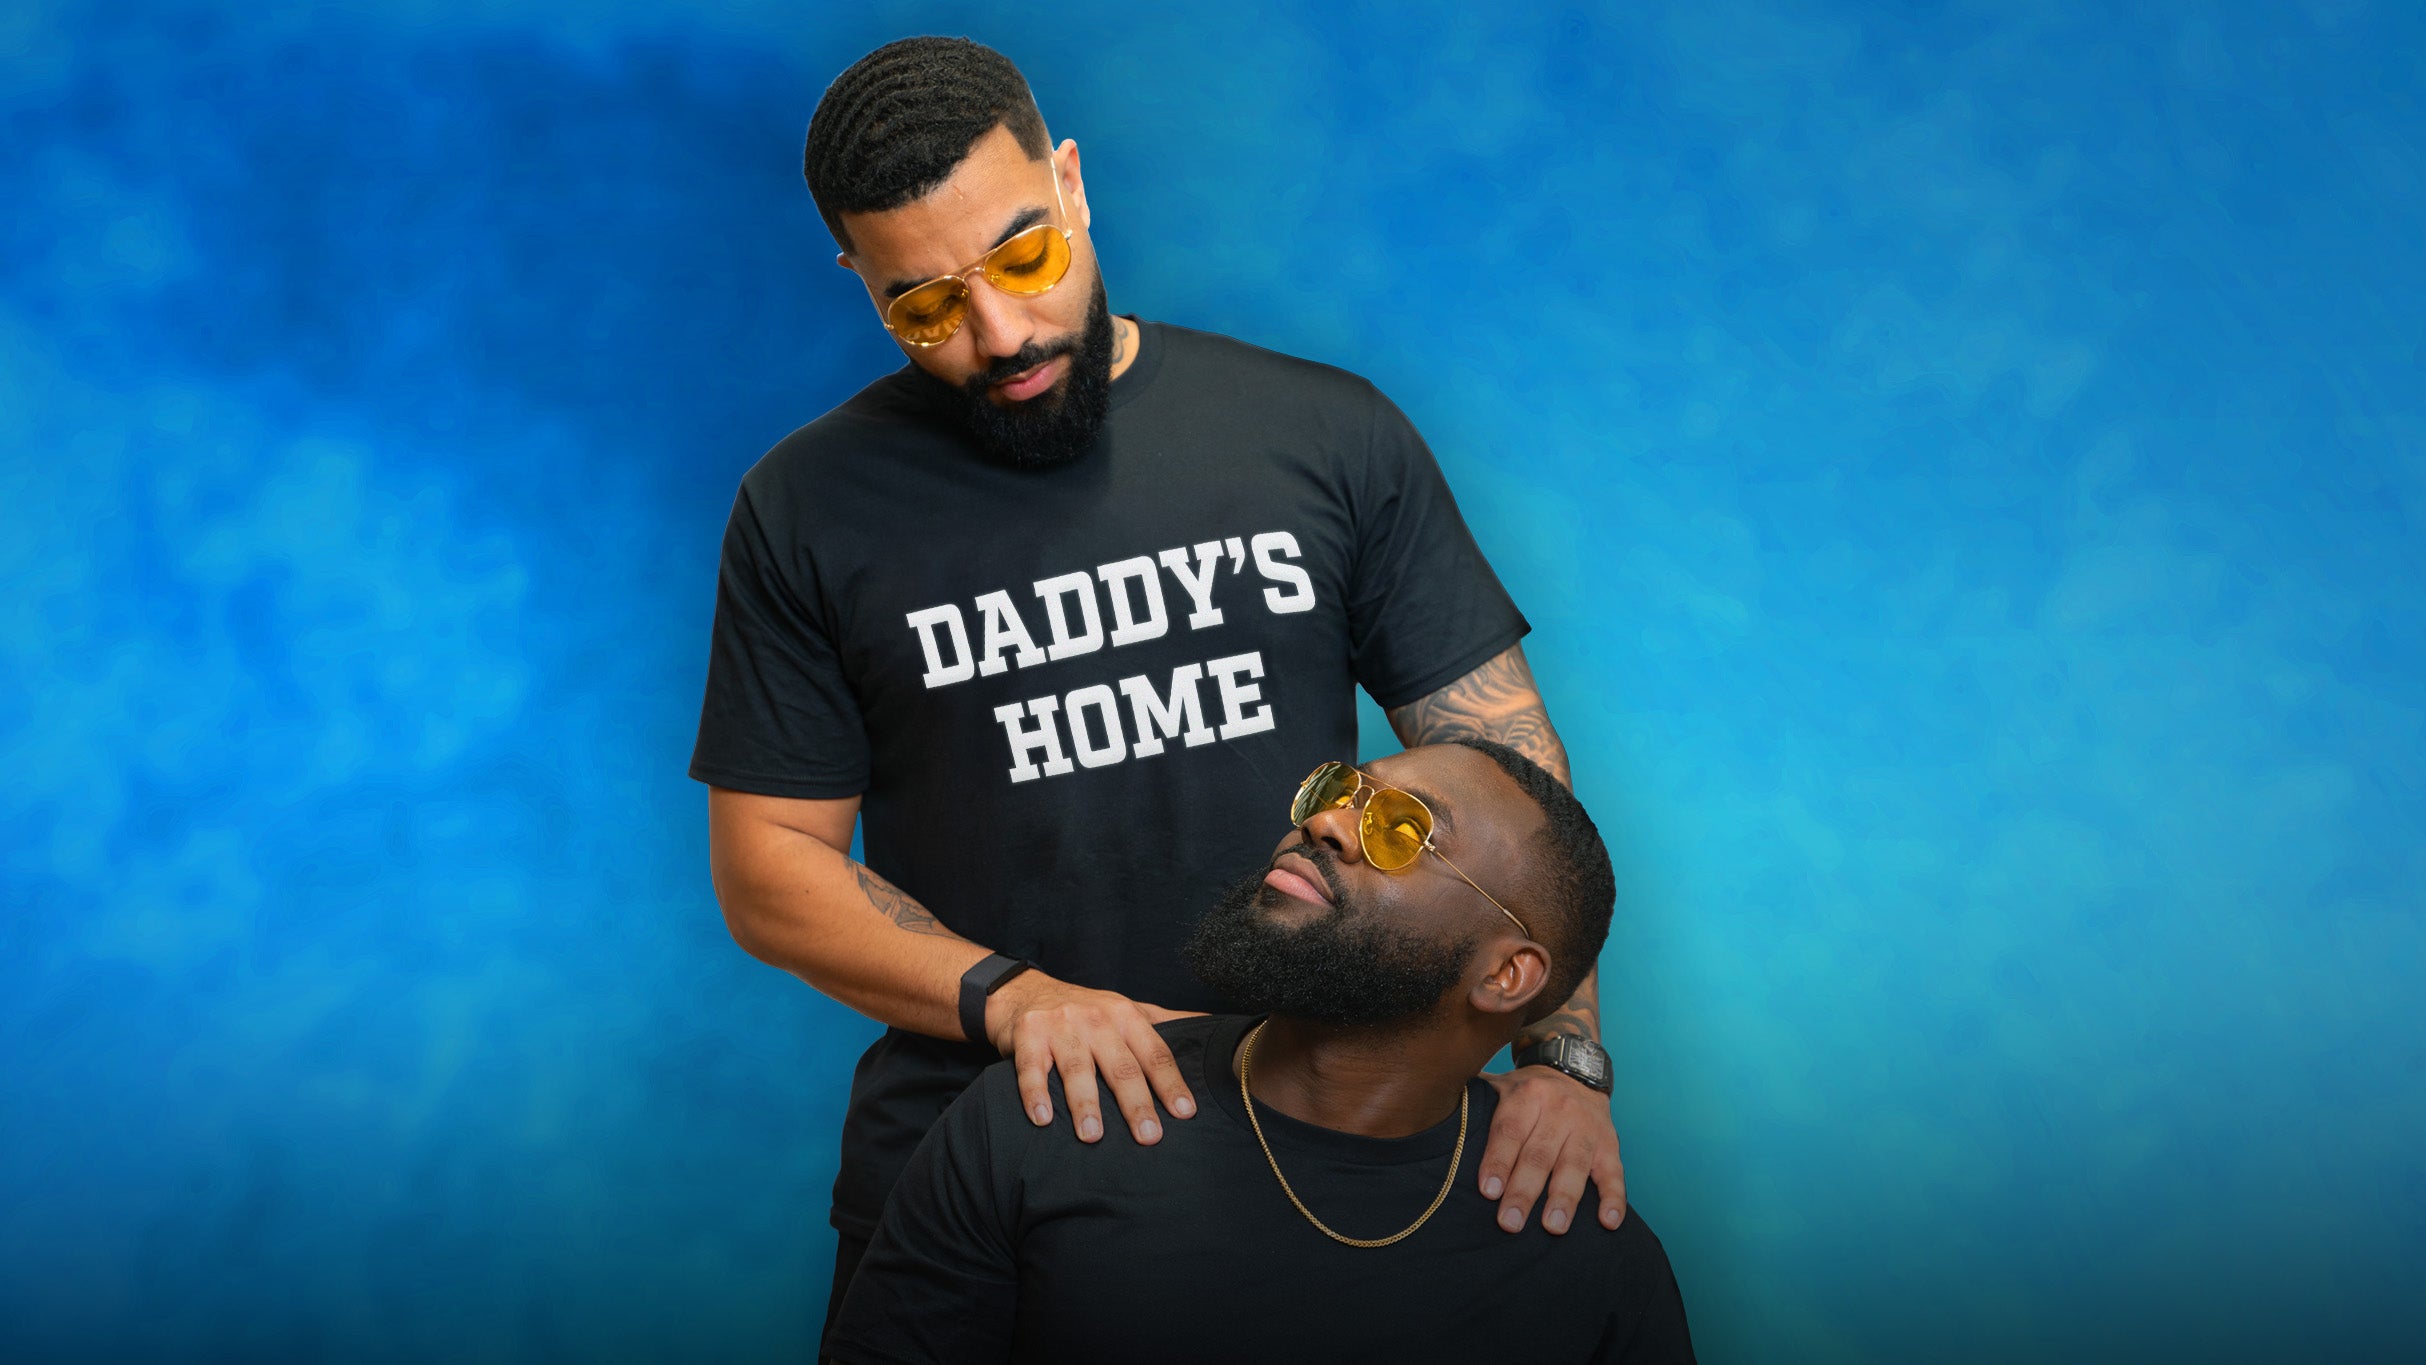 The Town Hall Presents ShxtsNgigs: Daddy's Home Tour